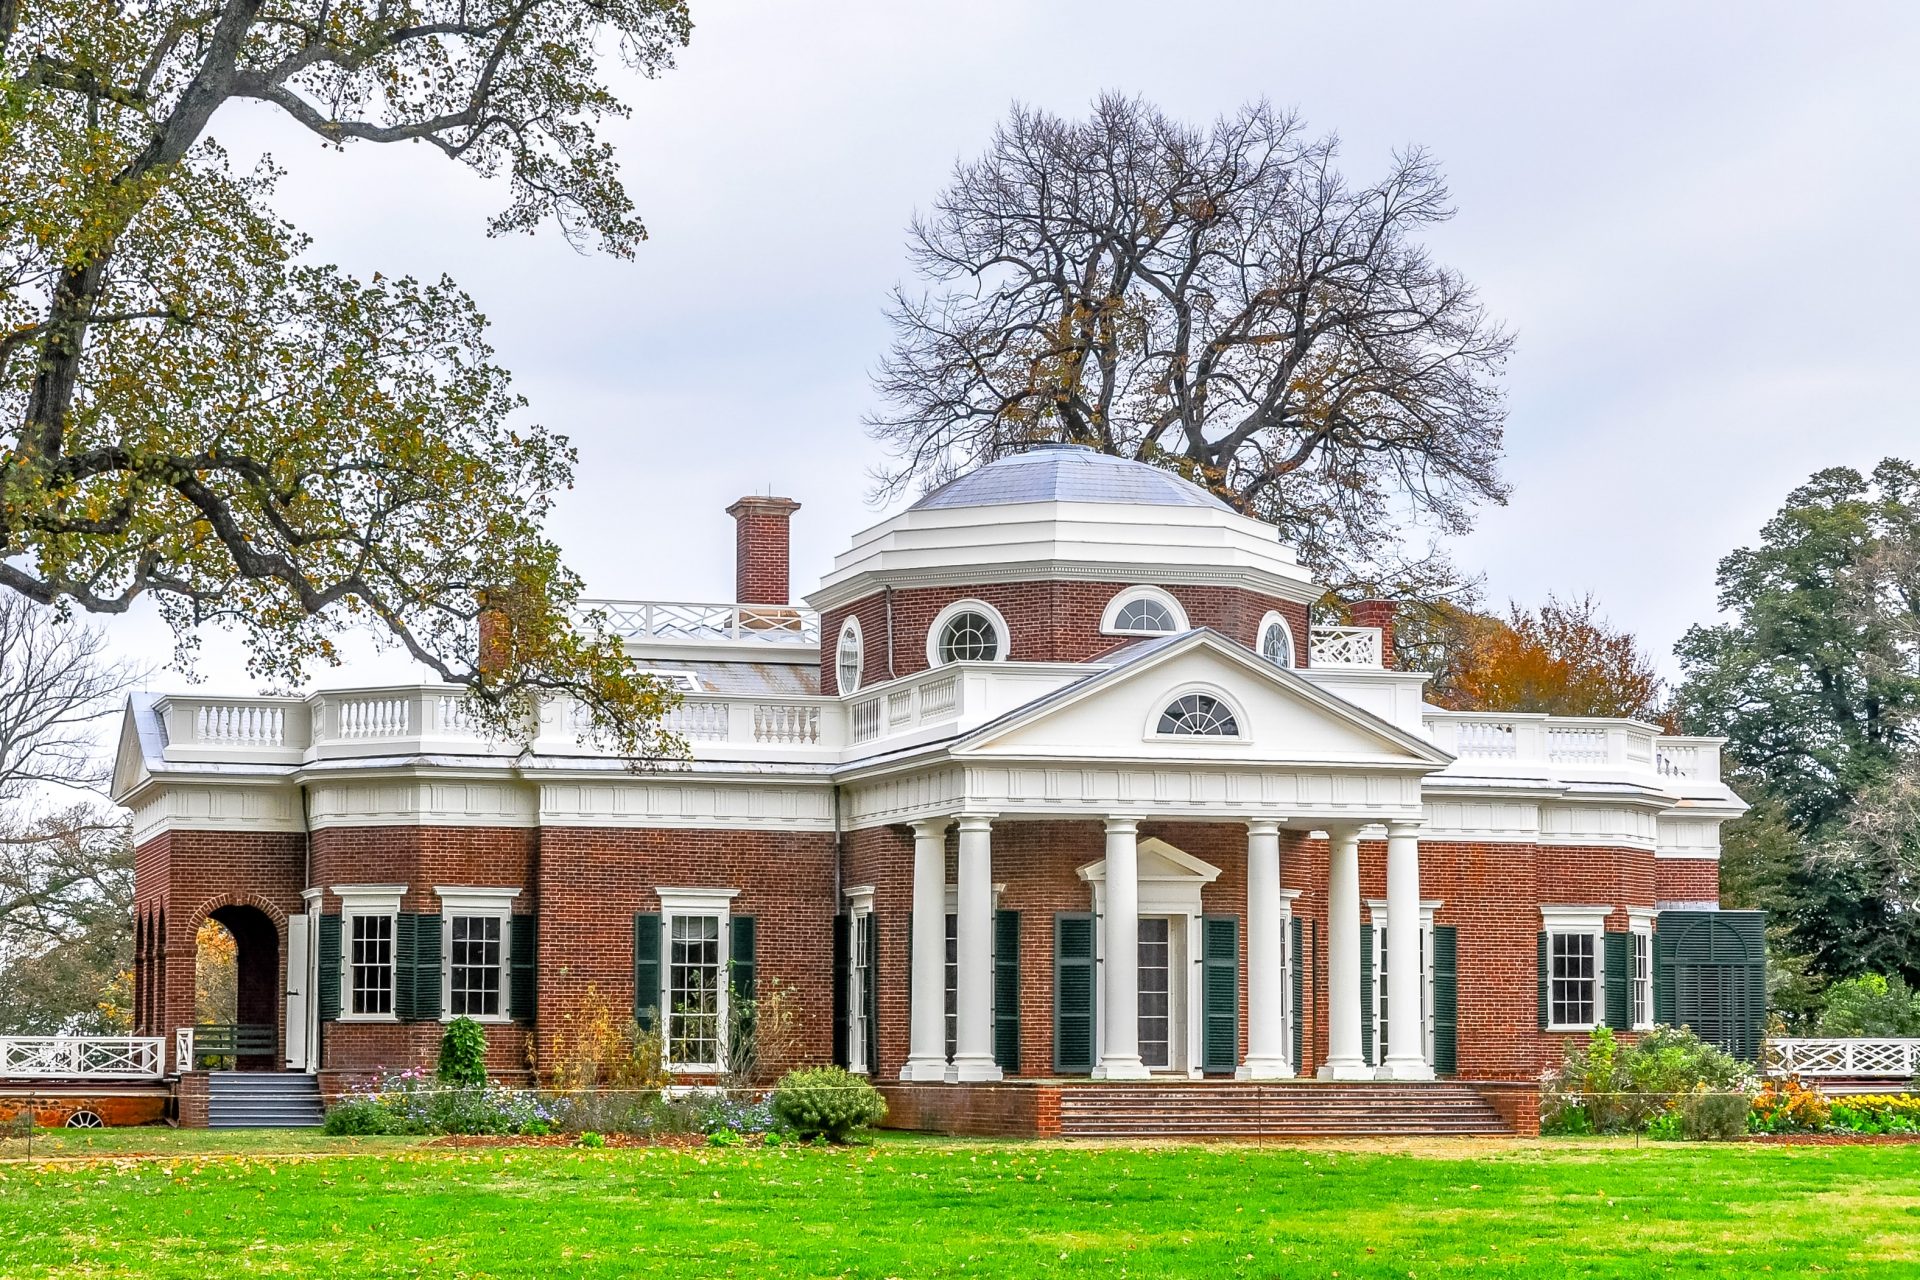 United States - Monticello and the University of Virginia